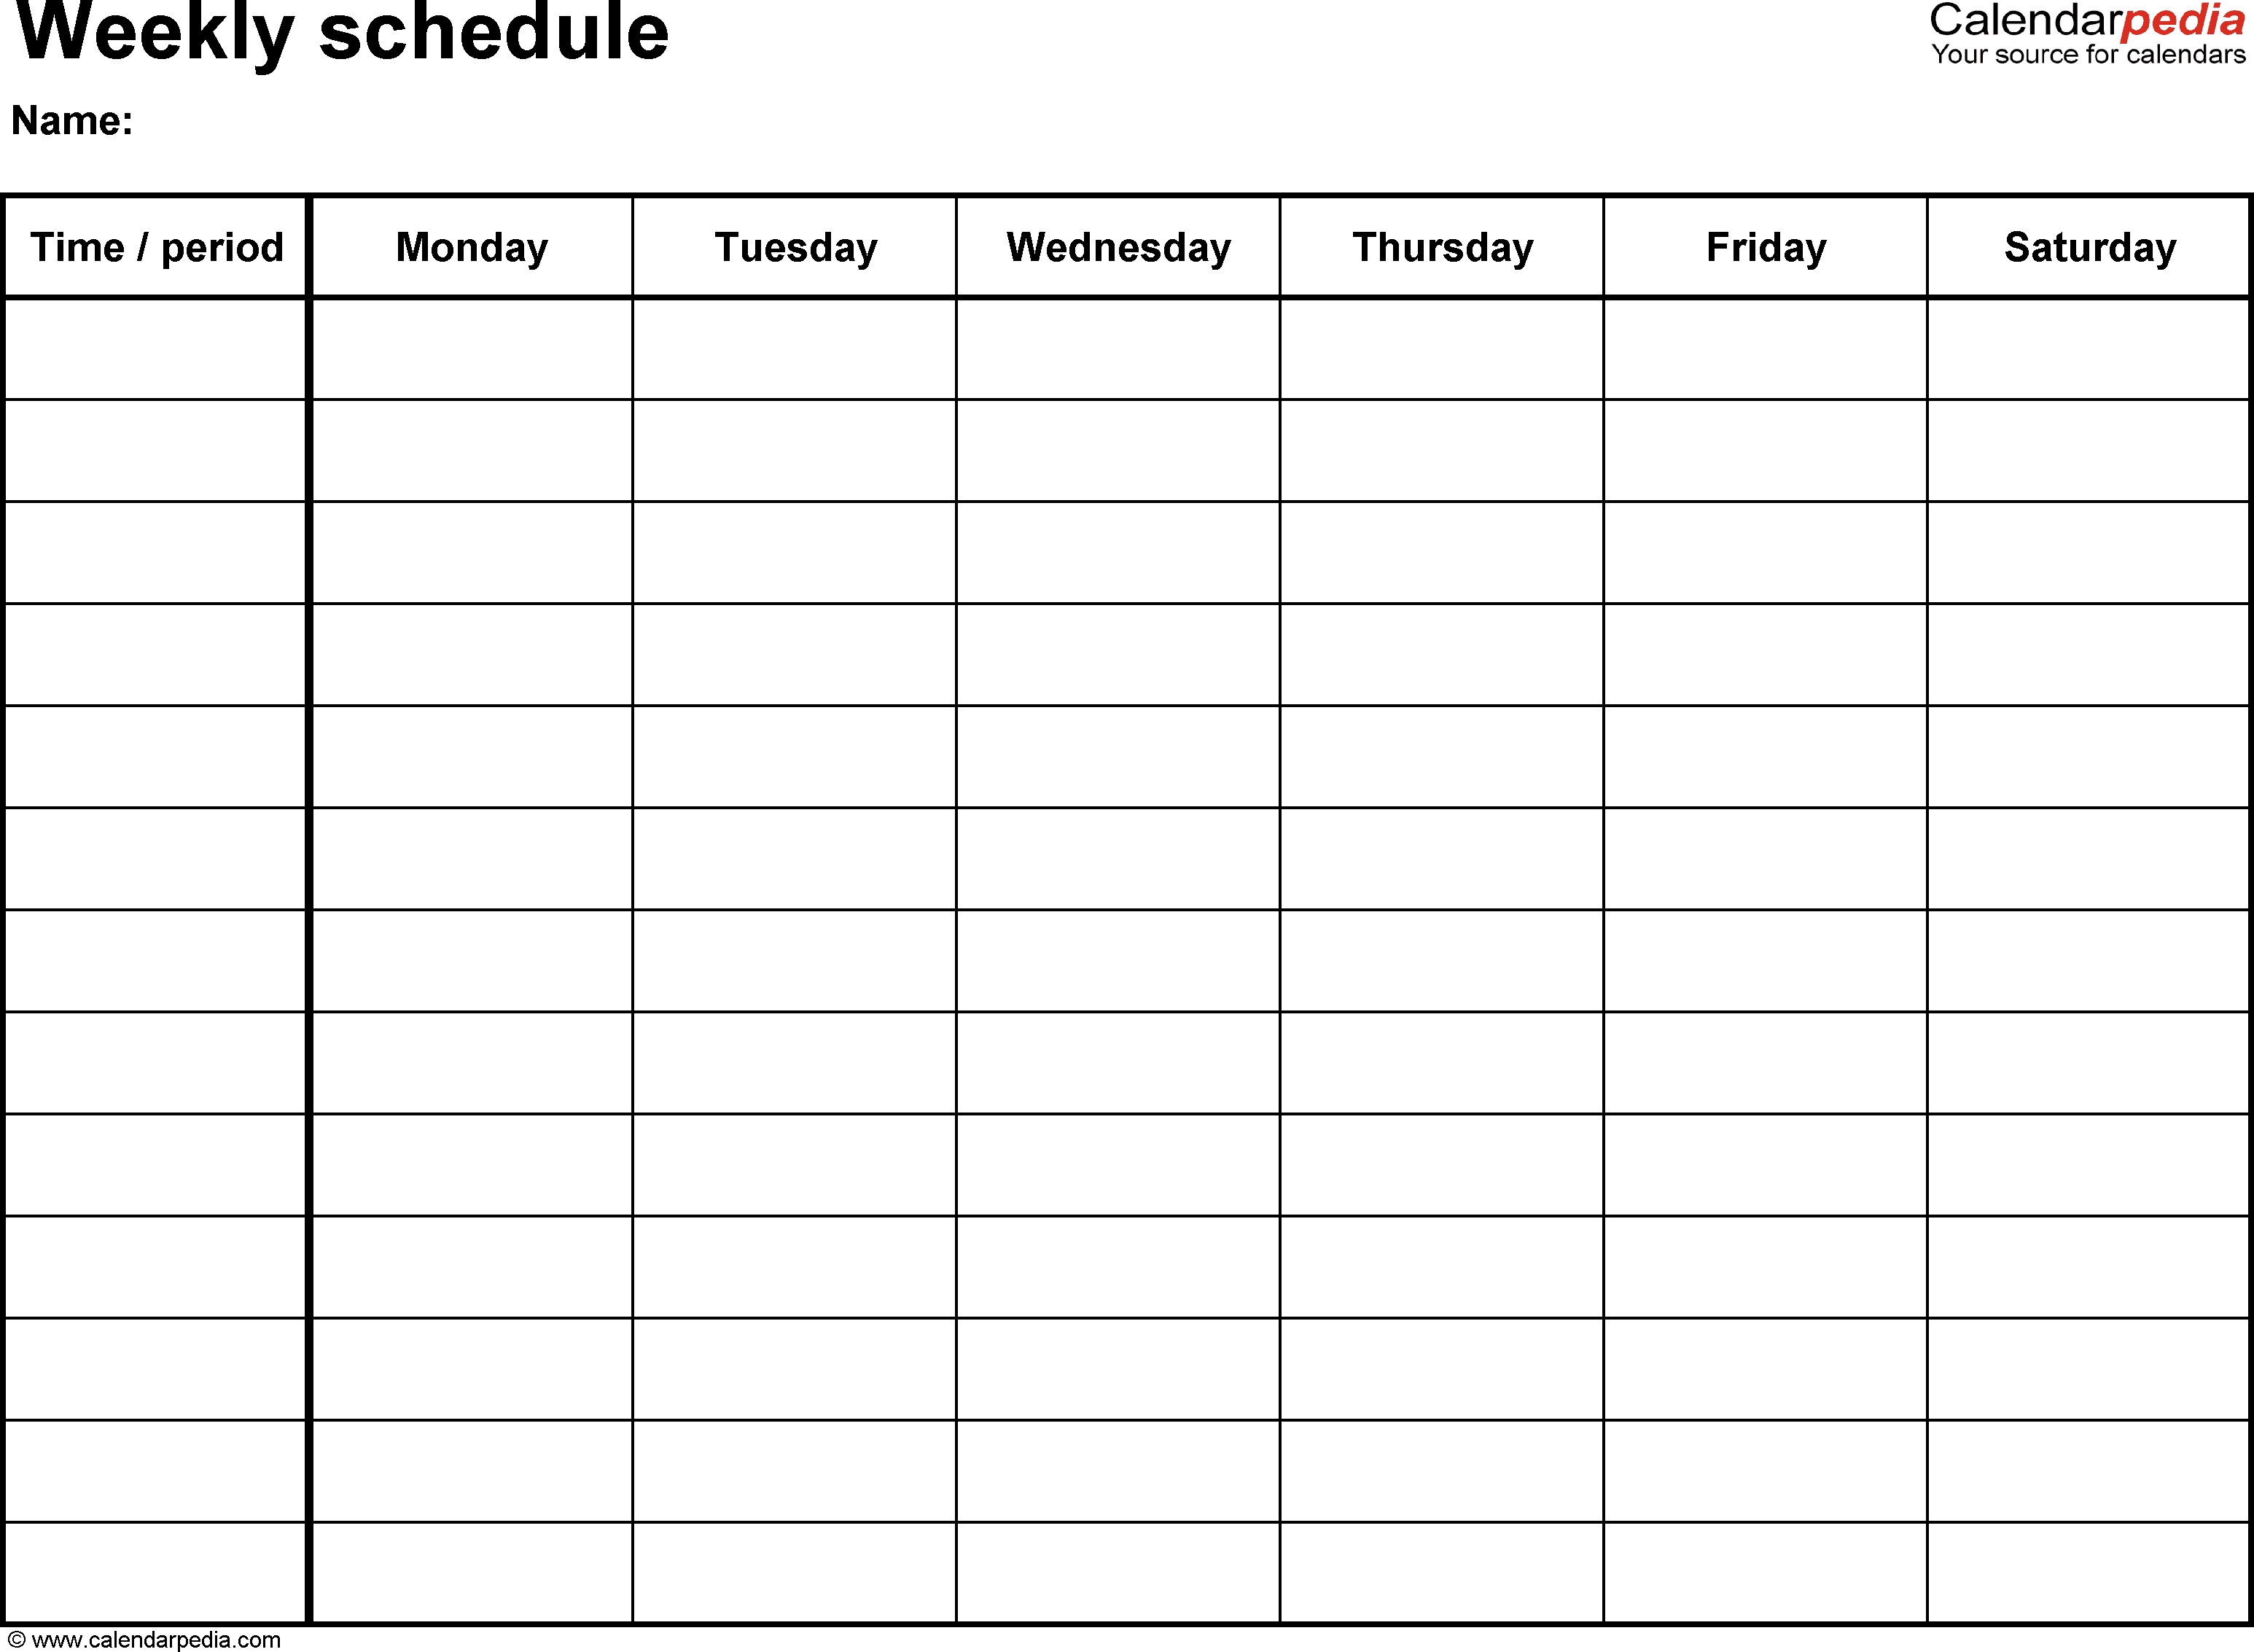 Free Weekly Schedule Templates For Word - 18 Templates within Printable Weekly Schedule Monday Thru Friday